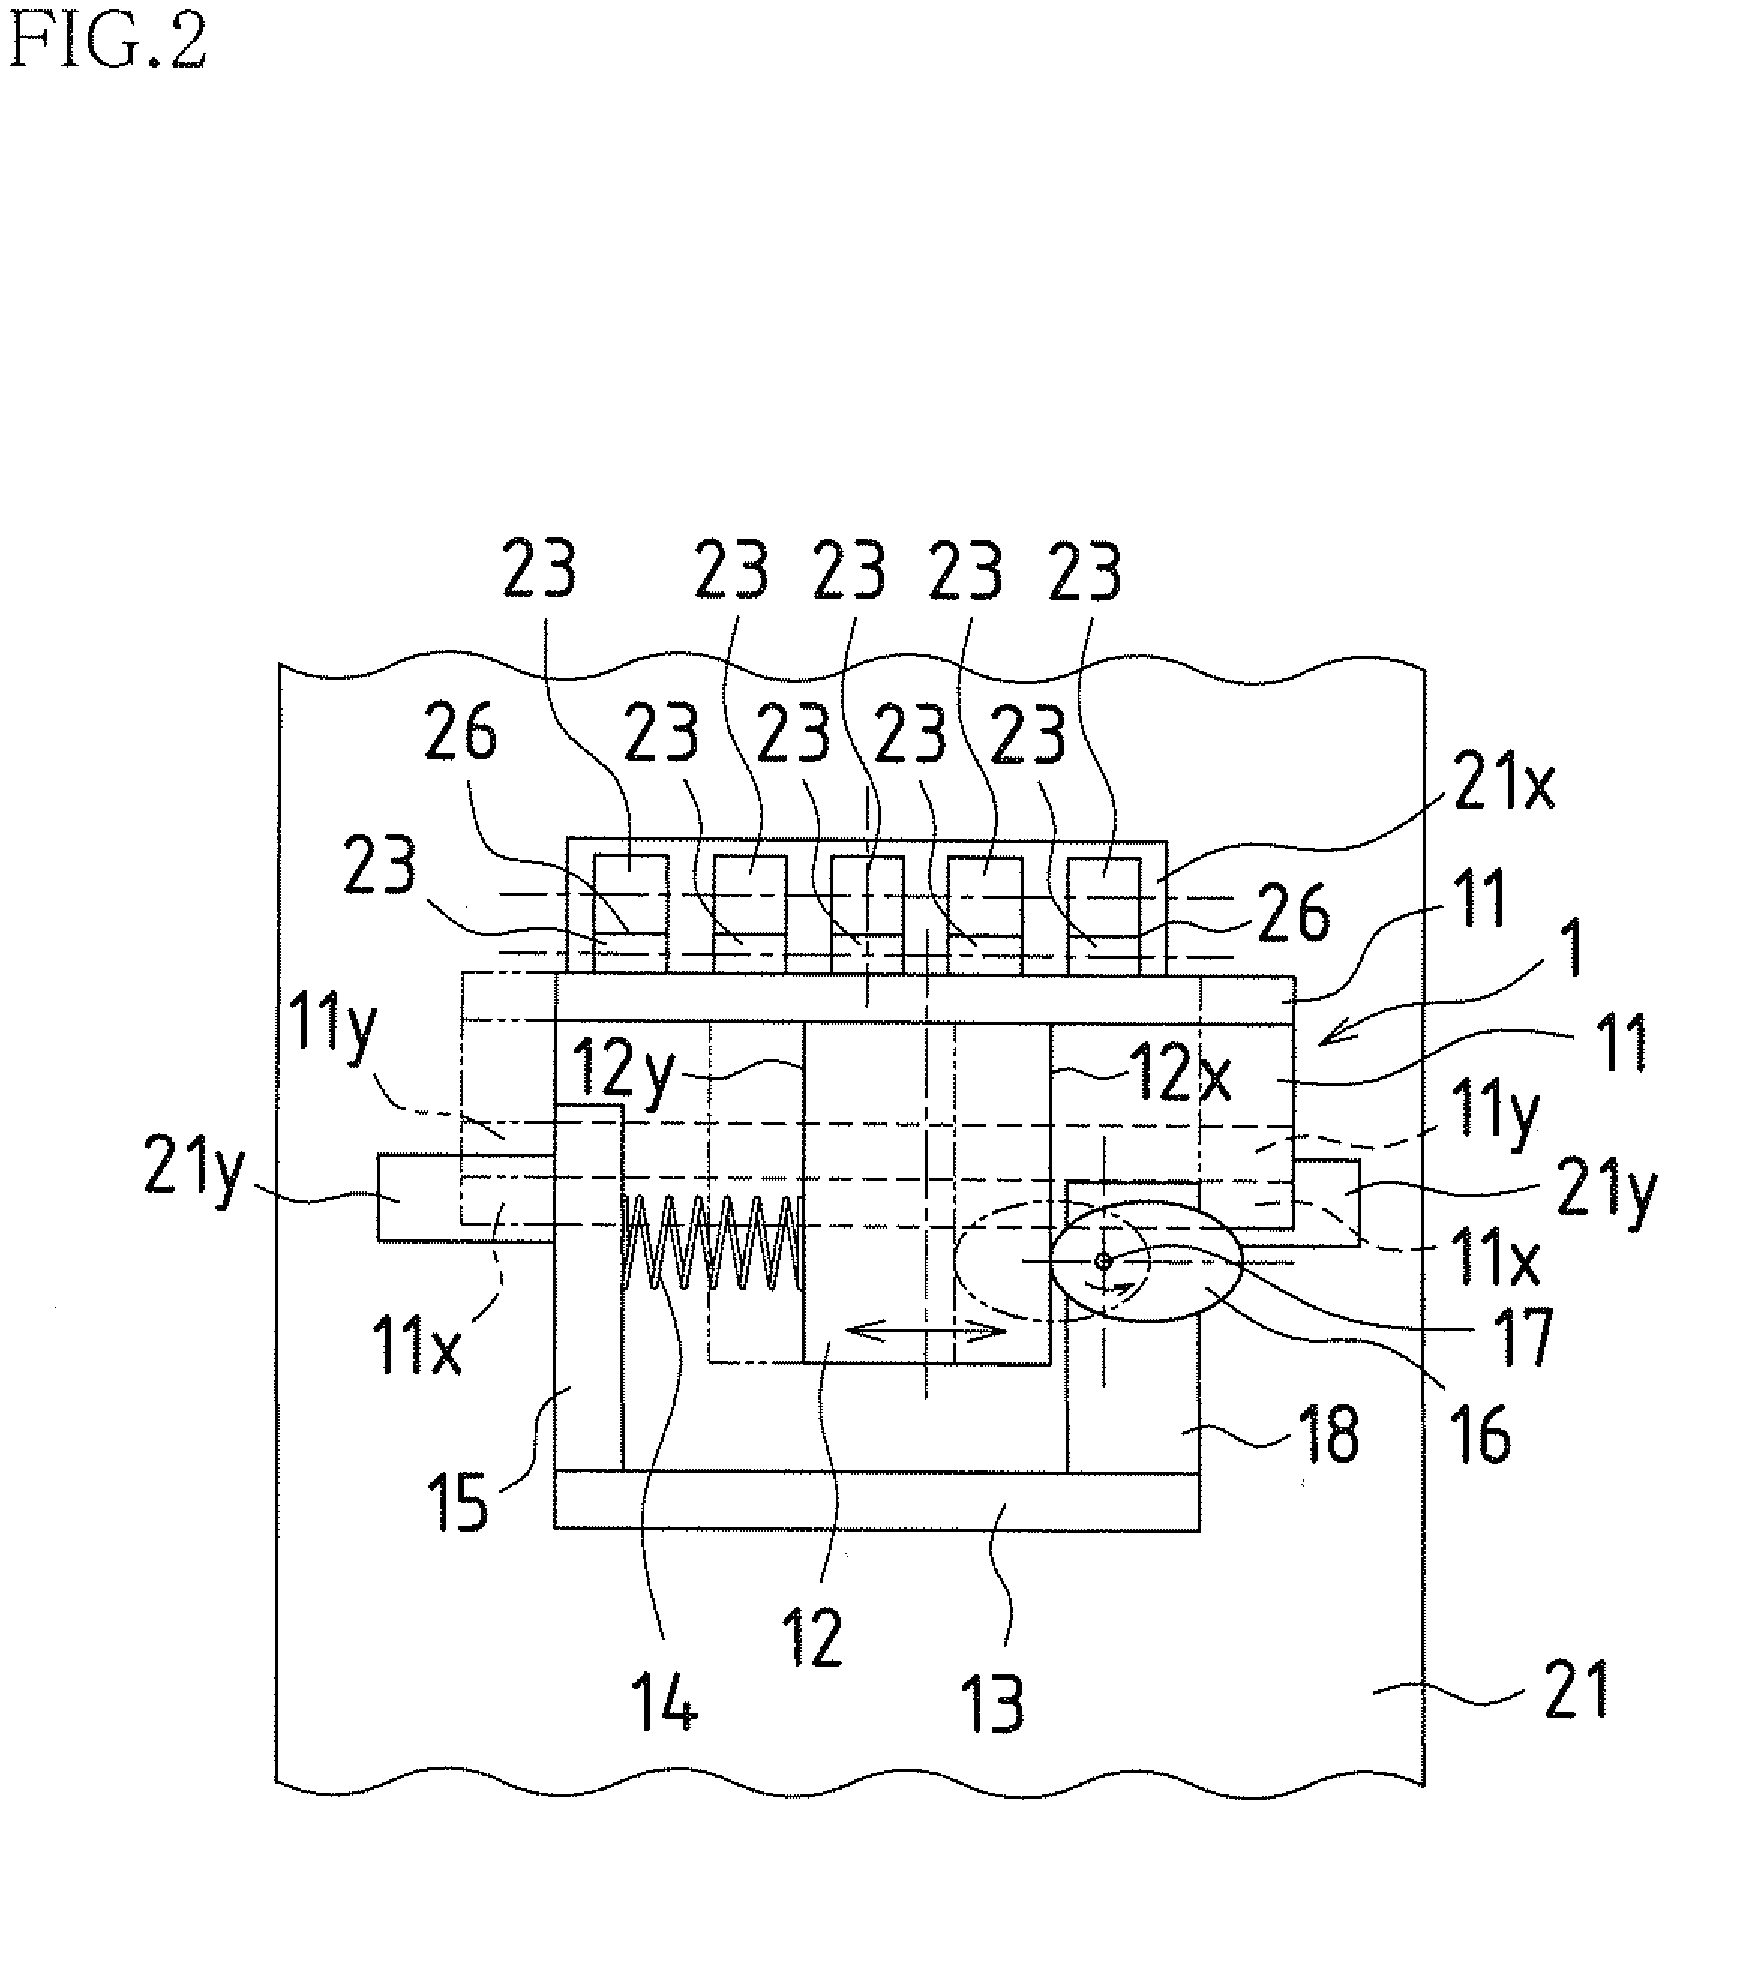 Discharge tray apparatus